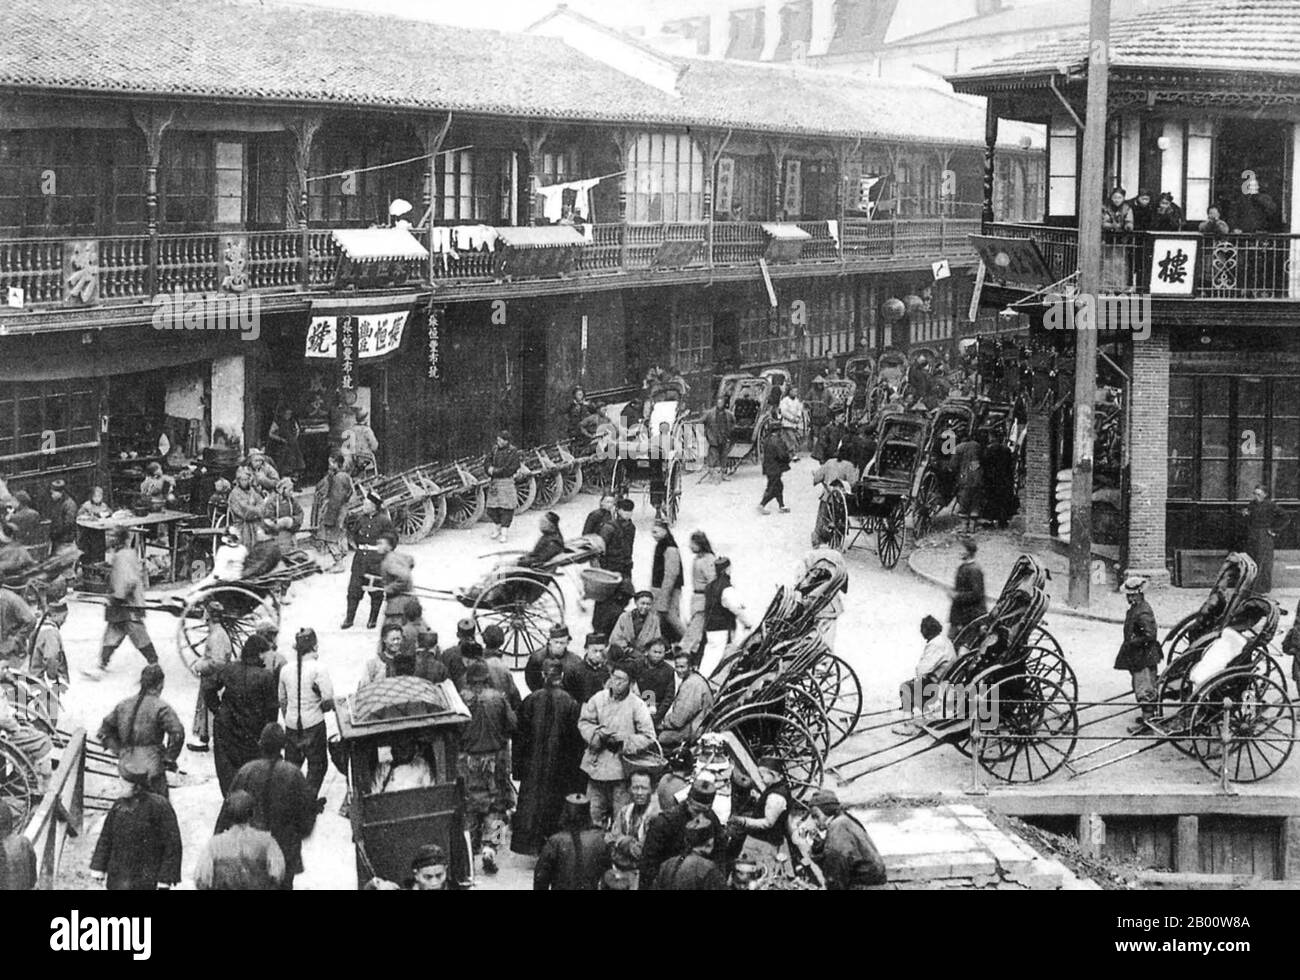 China: Rickshaws at Shanghai Old Town, North Gate area, c. 1911.  International attention to Shanghai grew in the 19th century due to its economic and trade potential at the Yangtze River. During the First Opium War (1839–1842), British forces temporarily held the city. The war ended with the 1842 Treaty of Nanjing, opening Shanghai and other ports to international trade.  In 1863, the British settlement, located to the south of Suzhou creek (Huangpu district), and the American settlement, to the north of Suzhou creek (Hongkou district), joined in order to form the International Settlement. Stock Photo